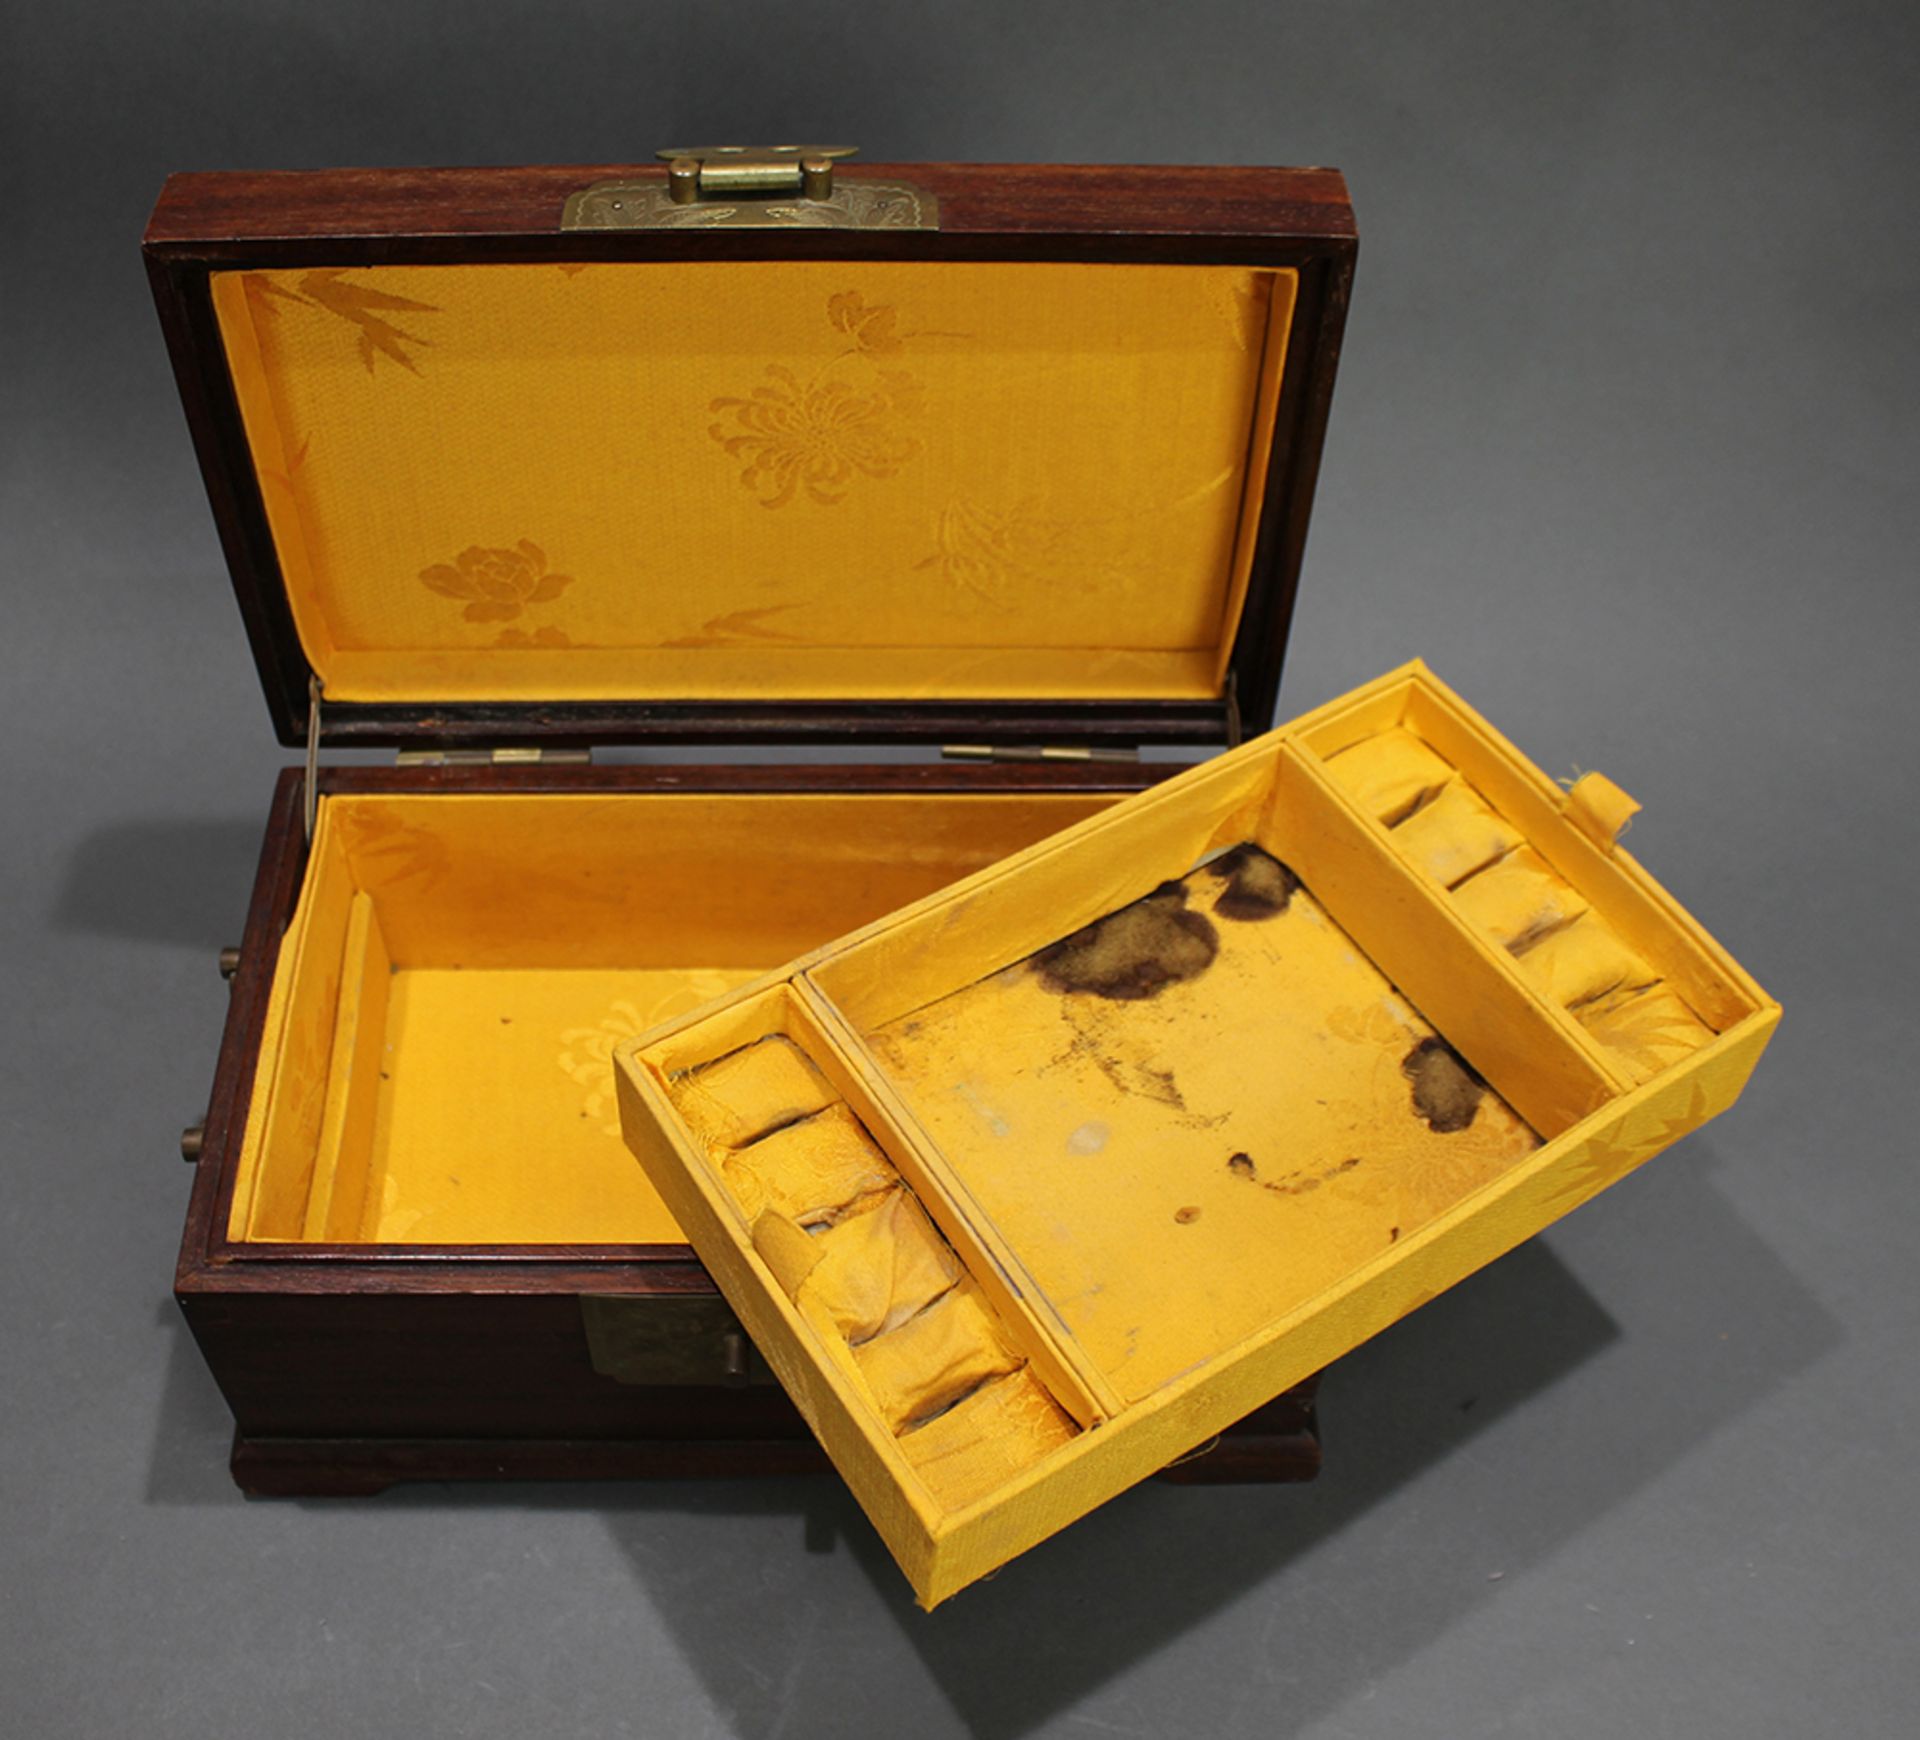 Vintage Chinese Jewellery Case - Image 4 of 5